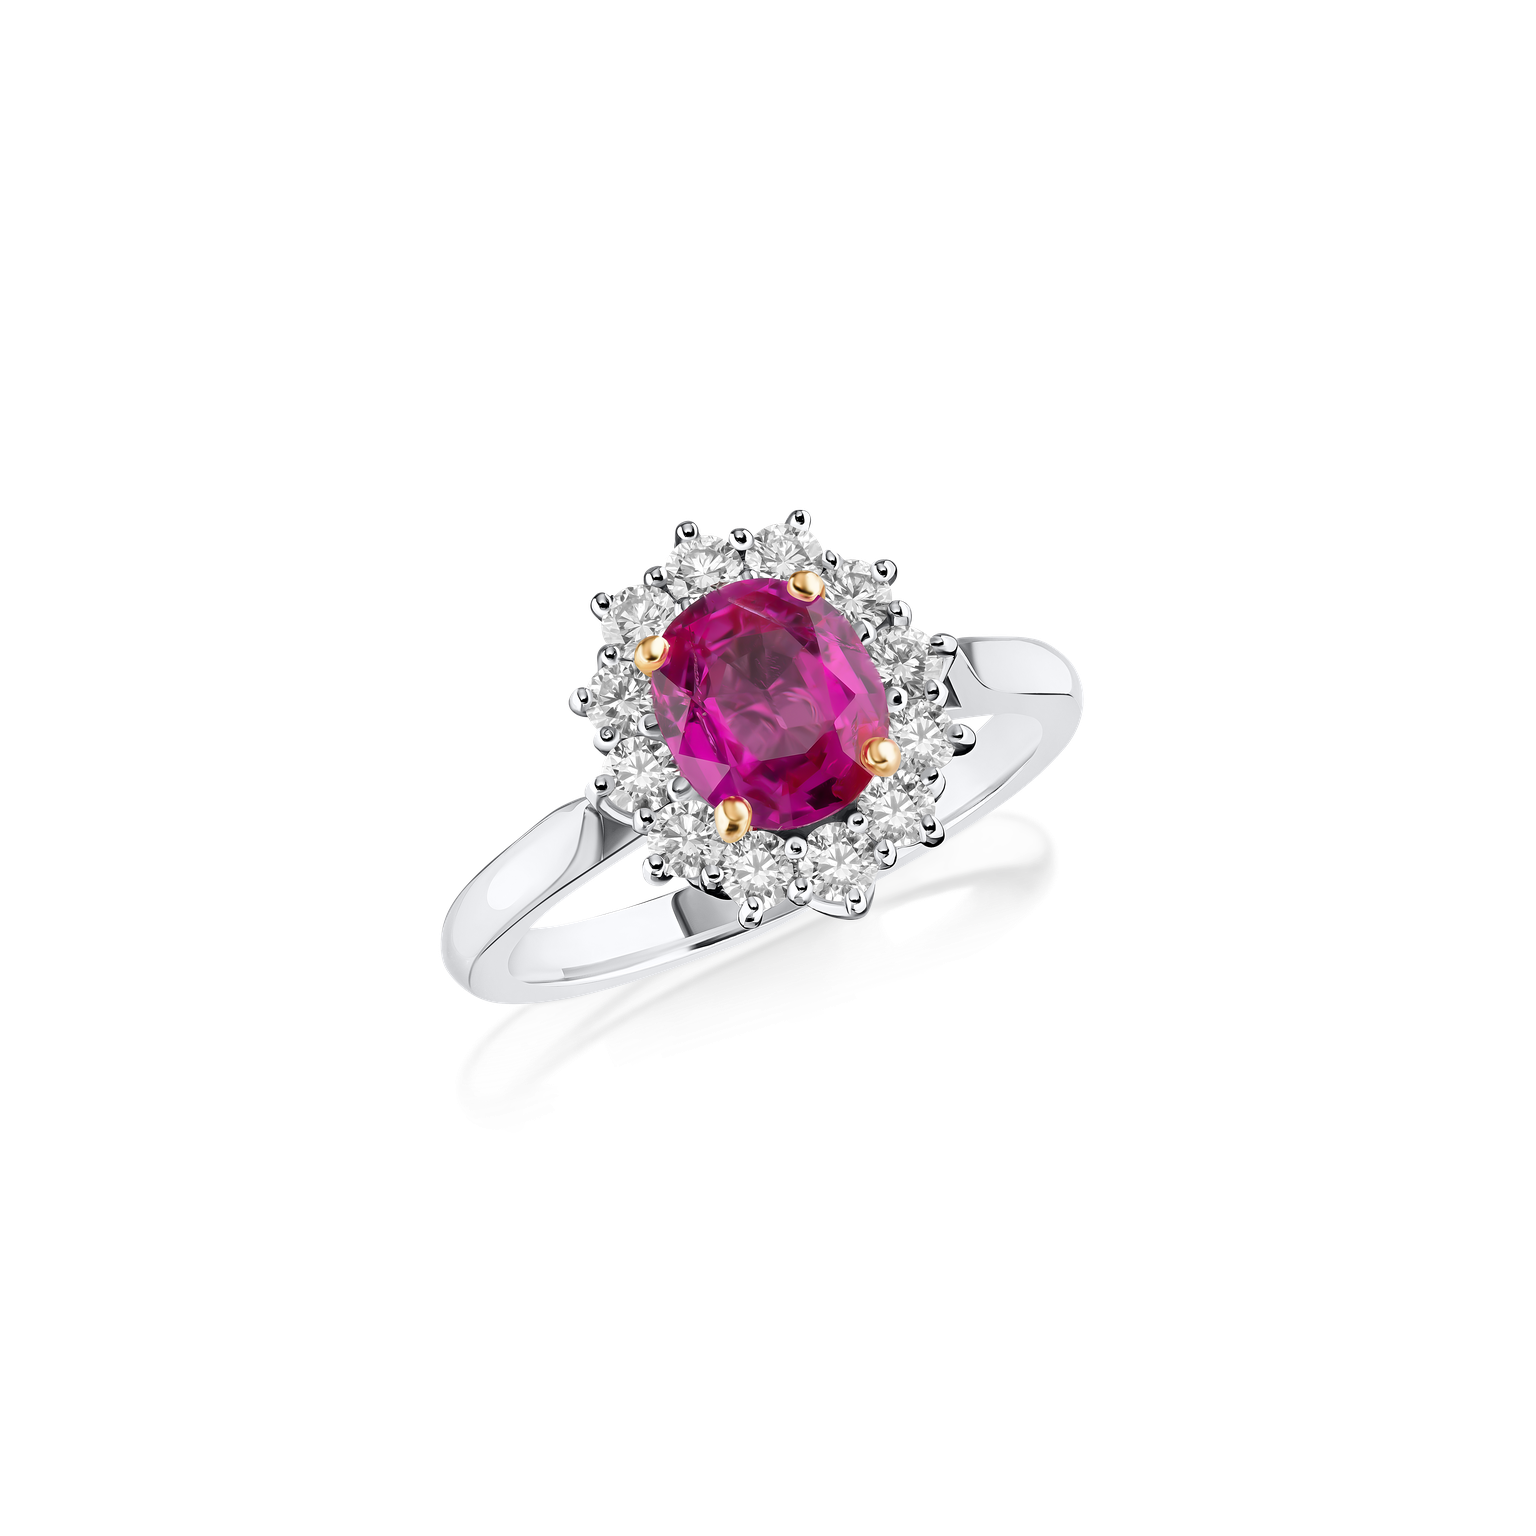 1.37cts Pink Sapphire and Diamond Cluster Ring